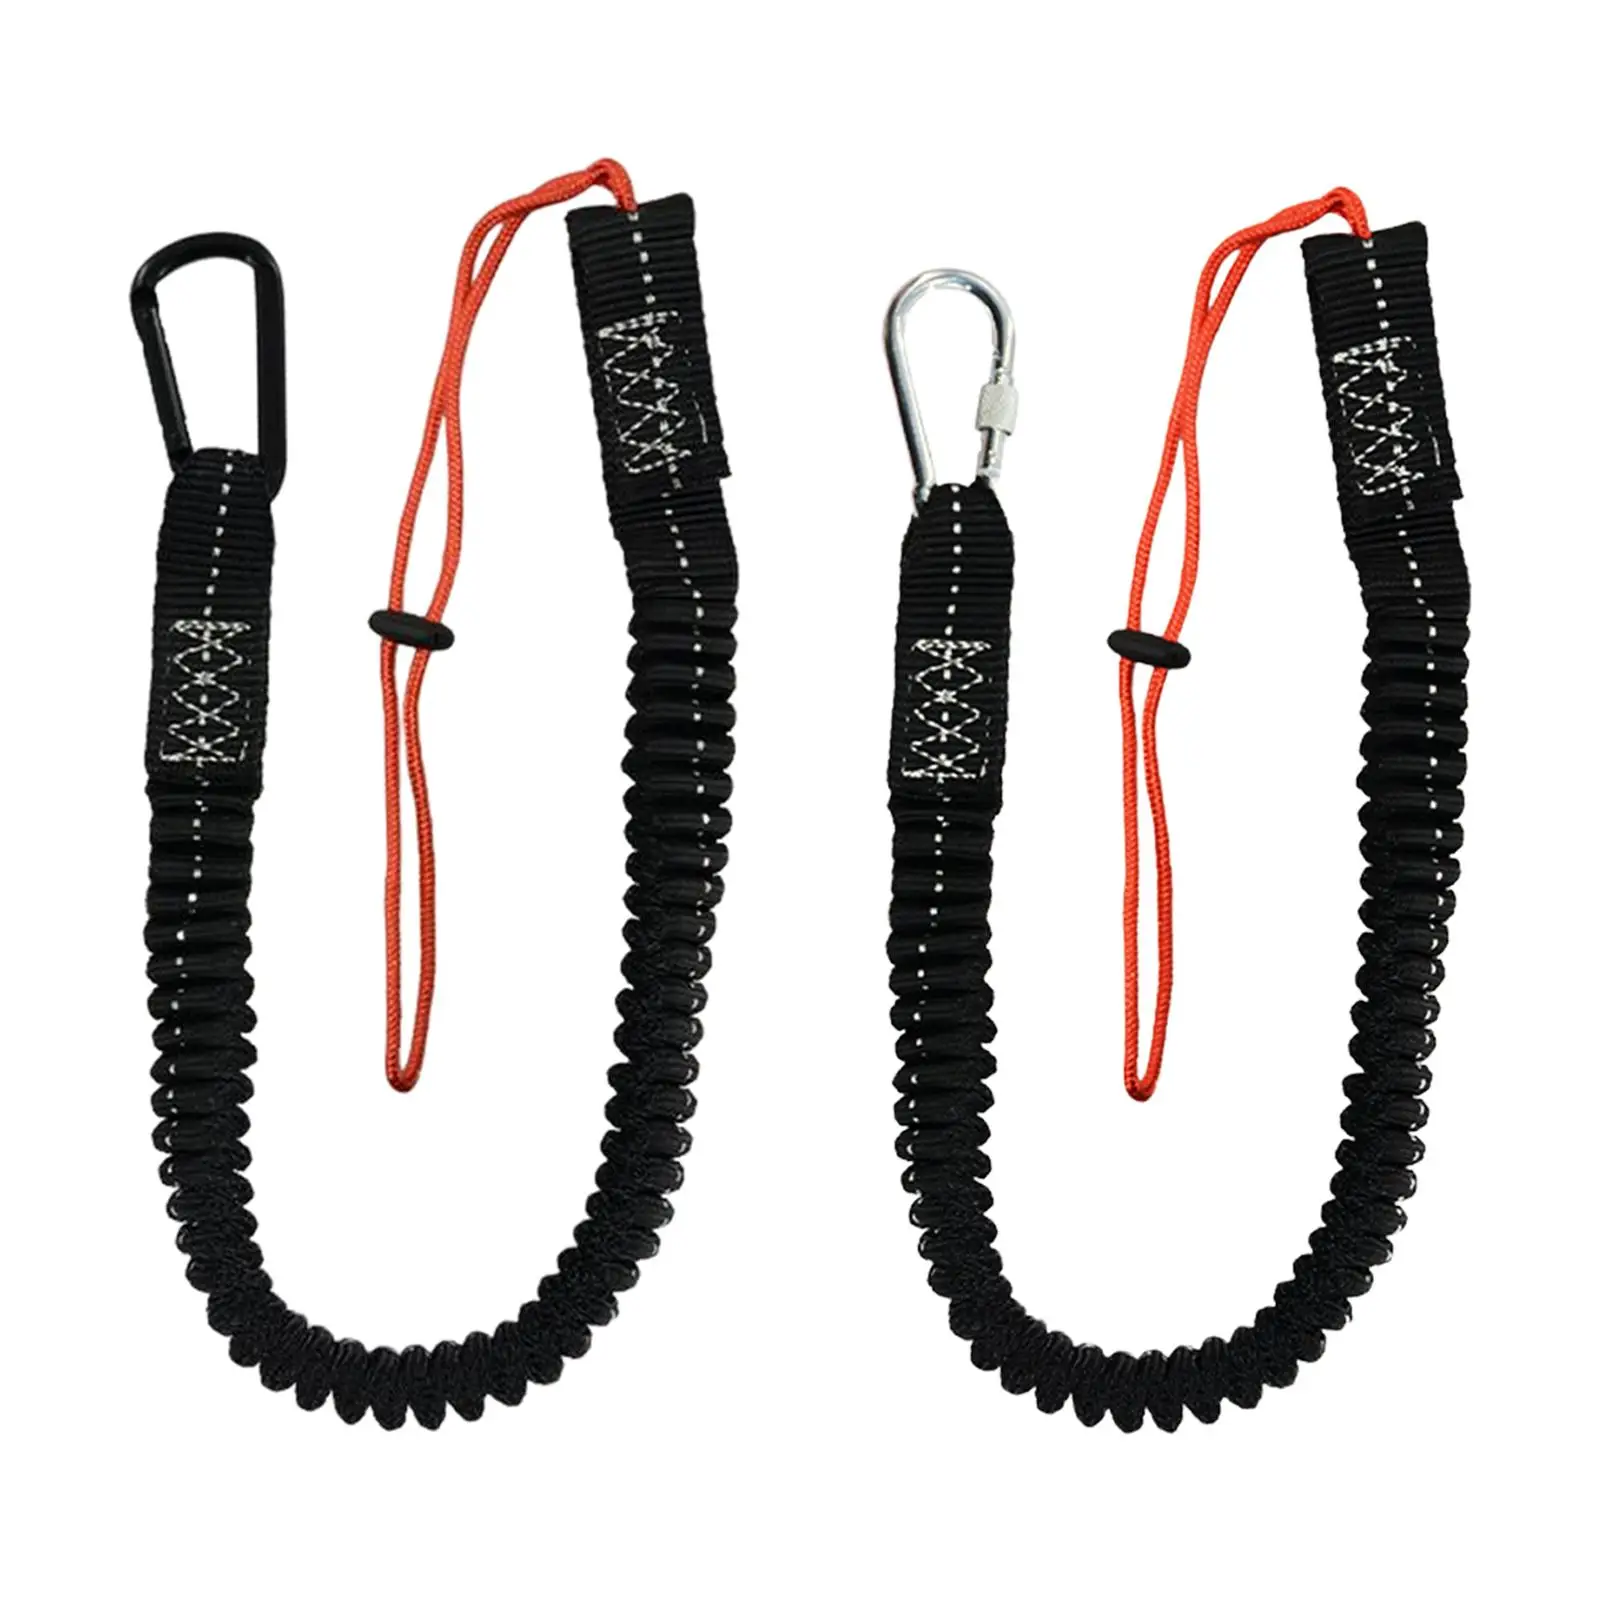 Tool Lanyard Safety Rope with Lock Carabiner Telescopic Shock Cord Stopper for Mountaineering Construction Rappelling Outdoor